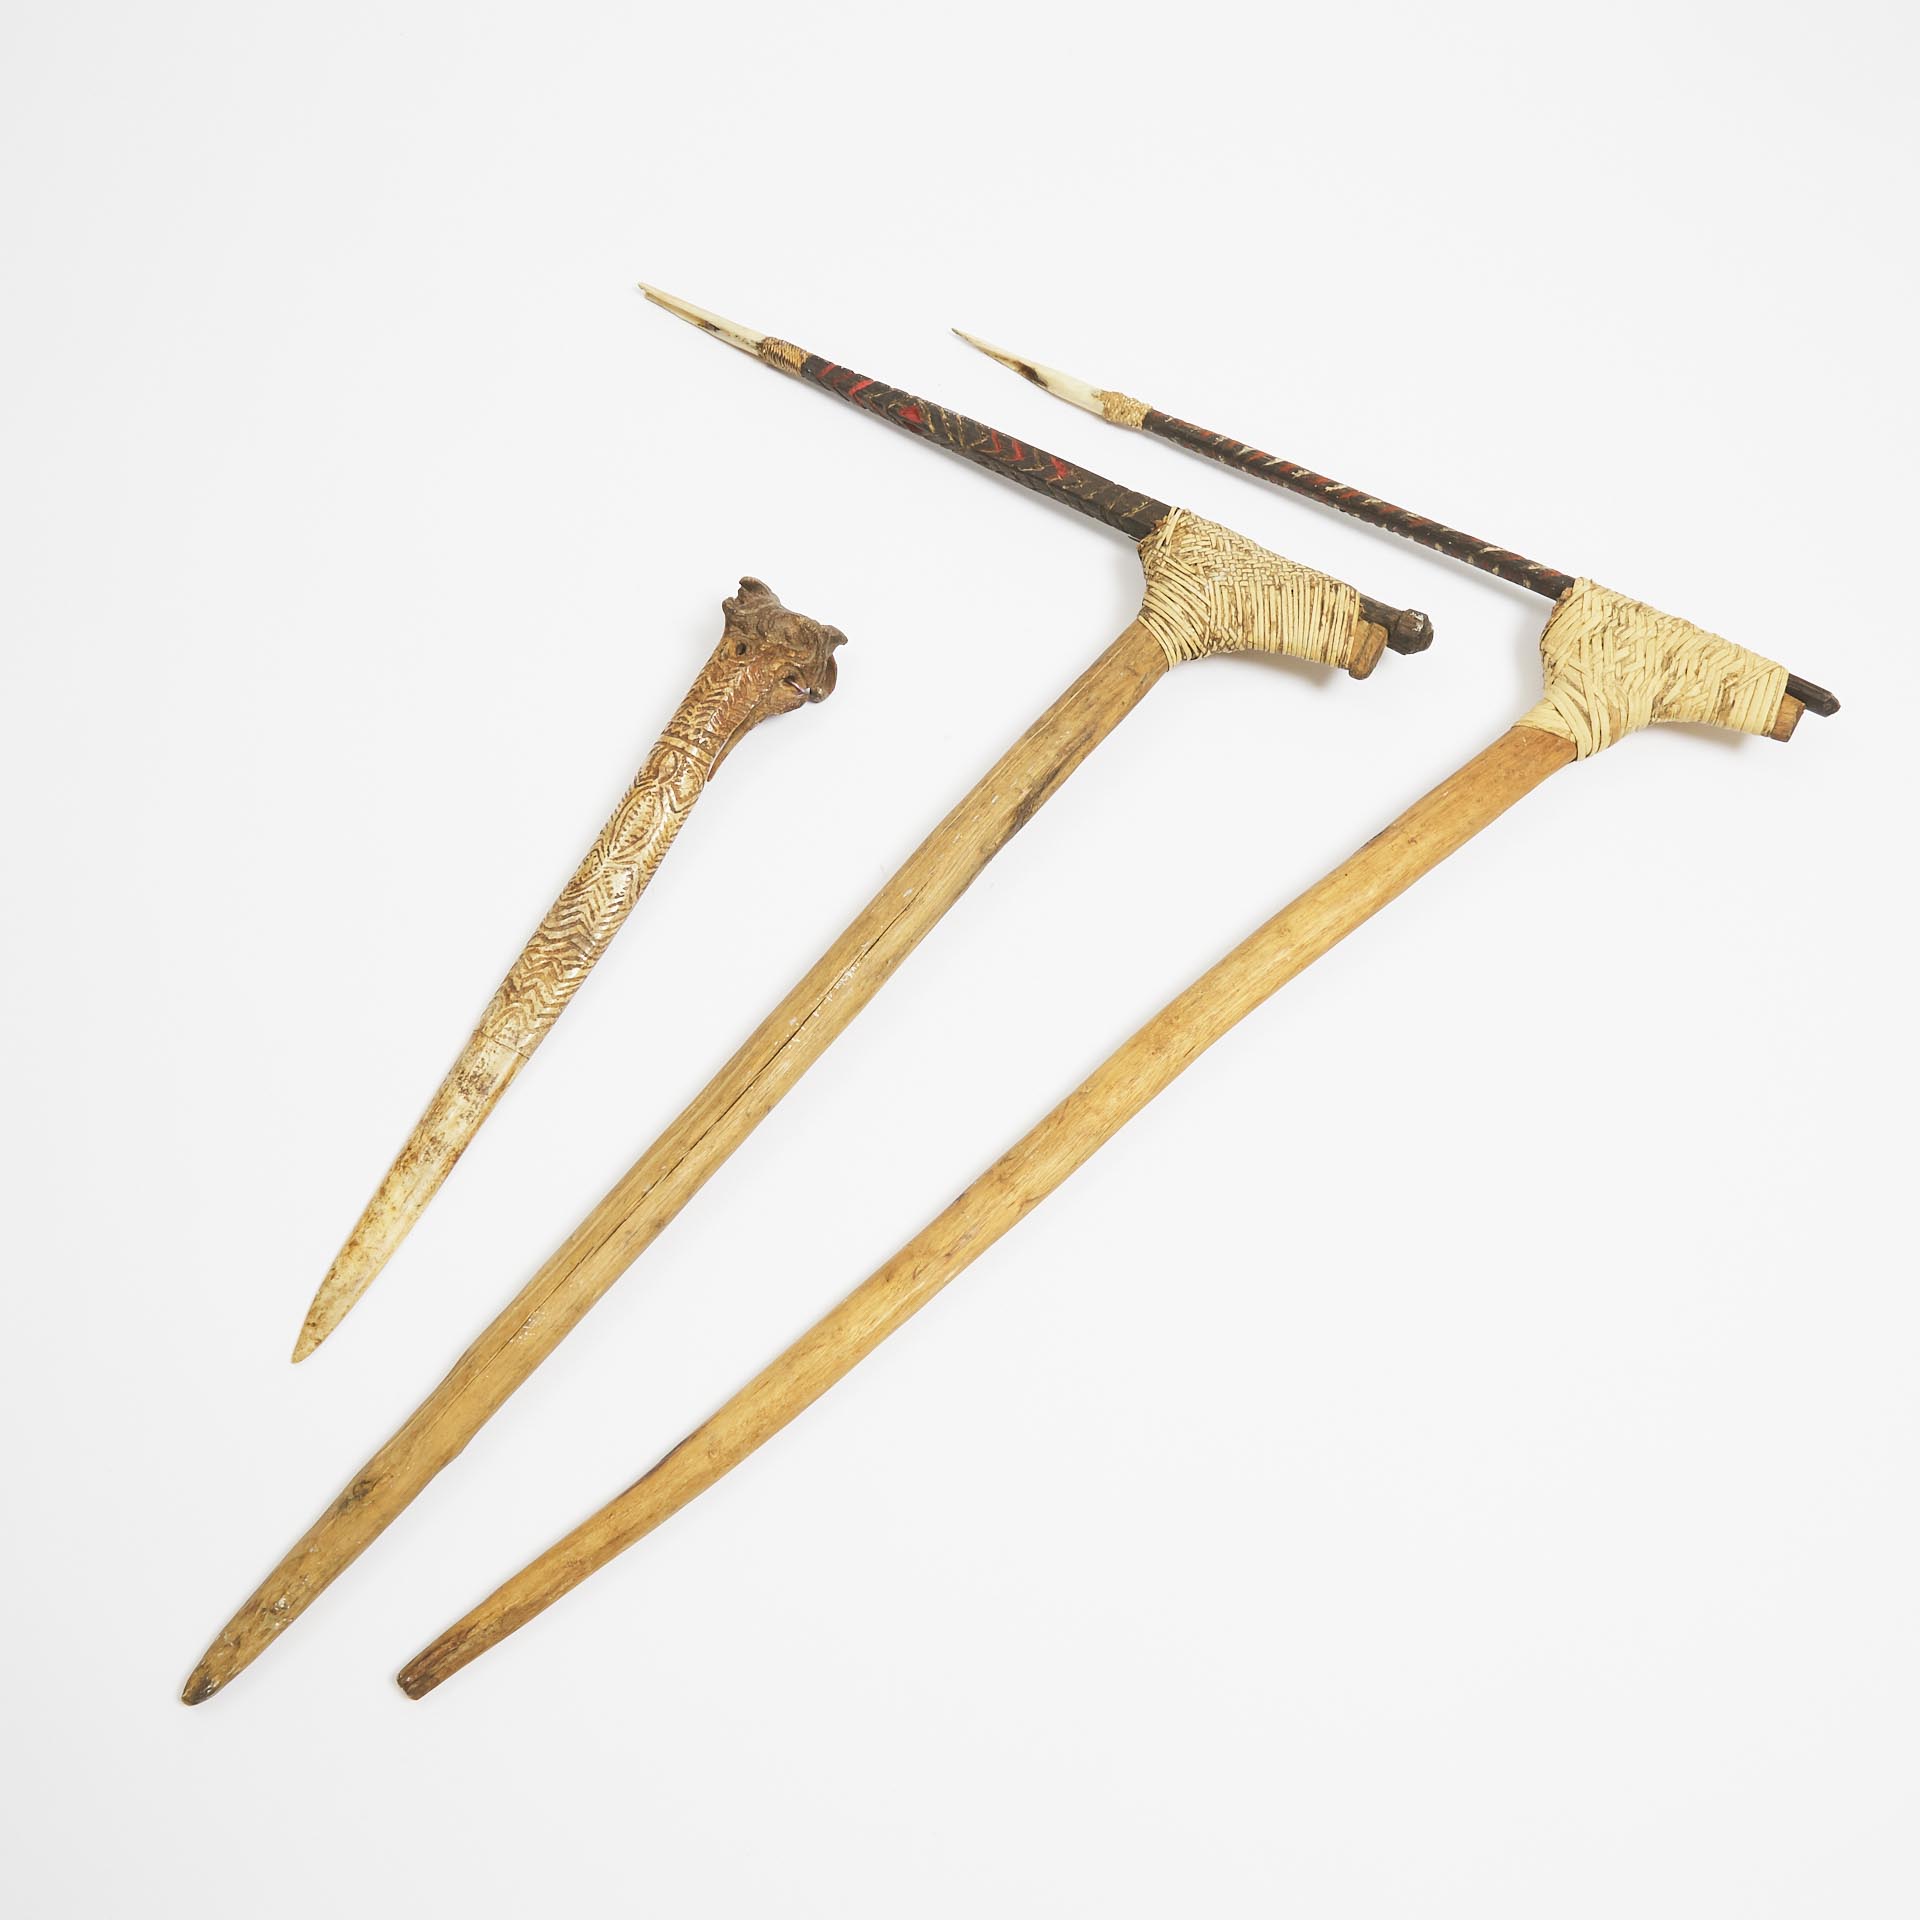 Middle Sepik Cassowary Bone Dagger, early 20th century together with two Pig Killing Sticks, mid to late 20th century, Papua New Guinea